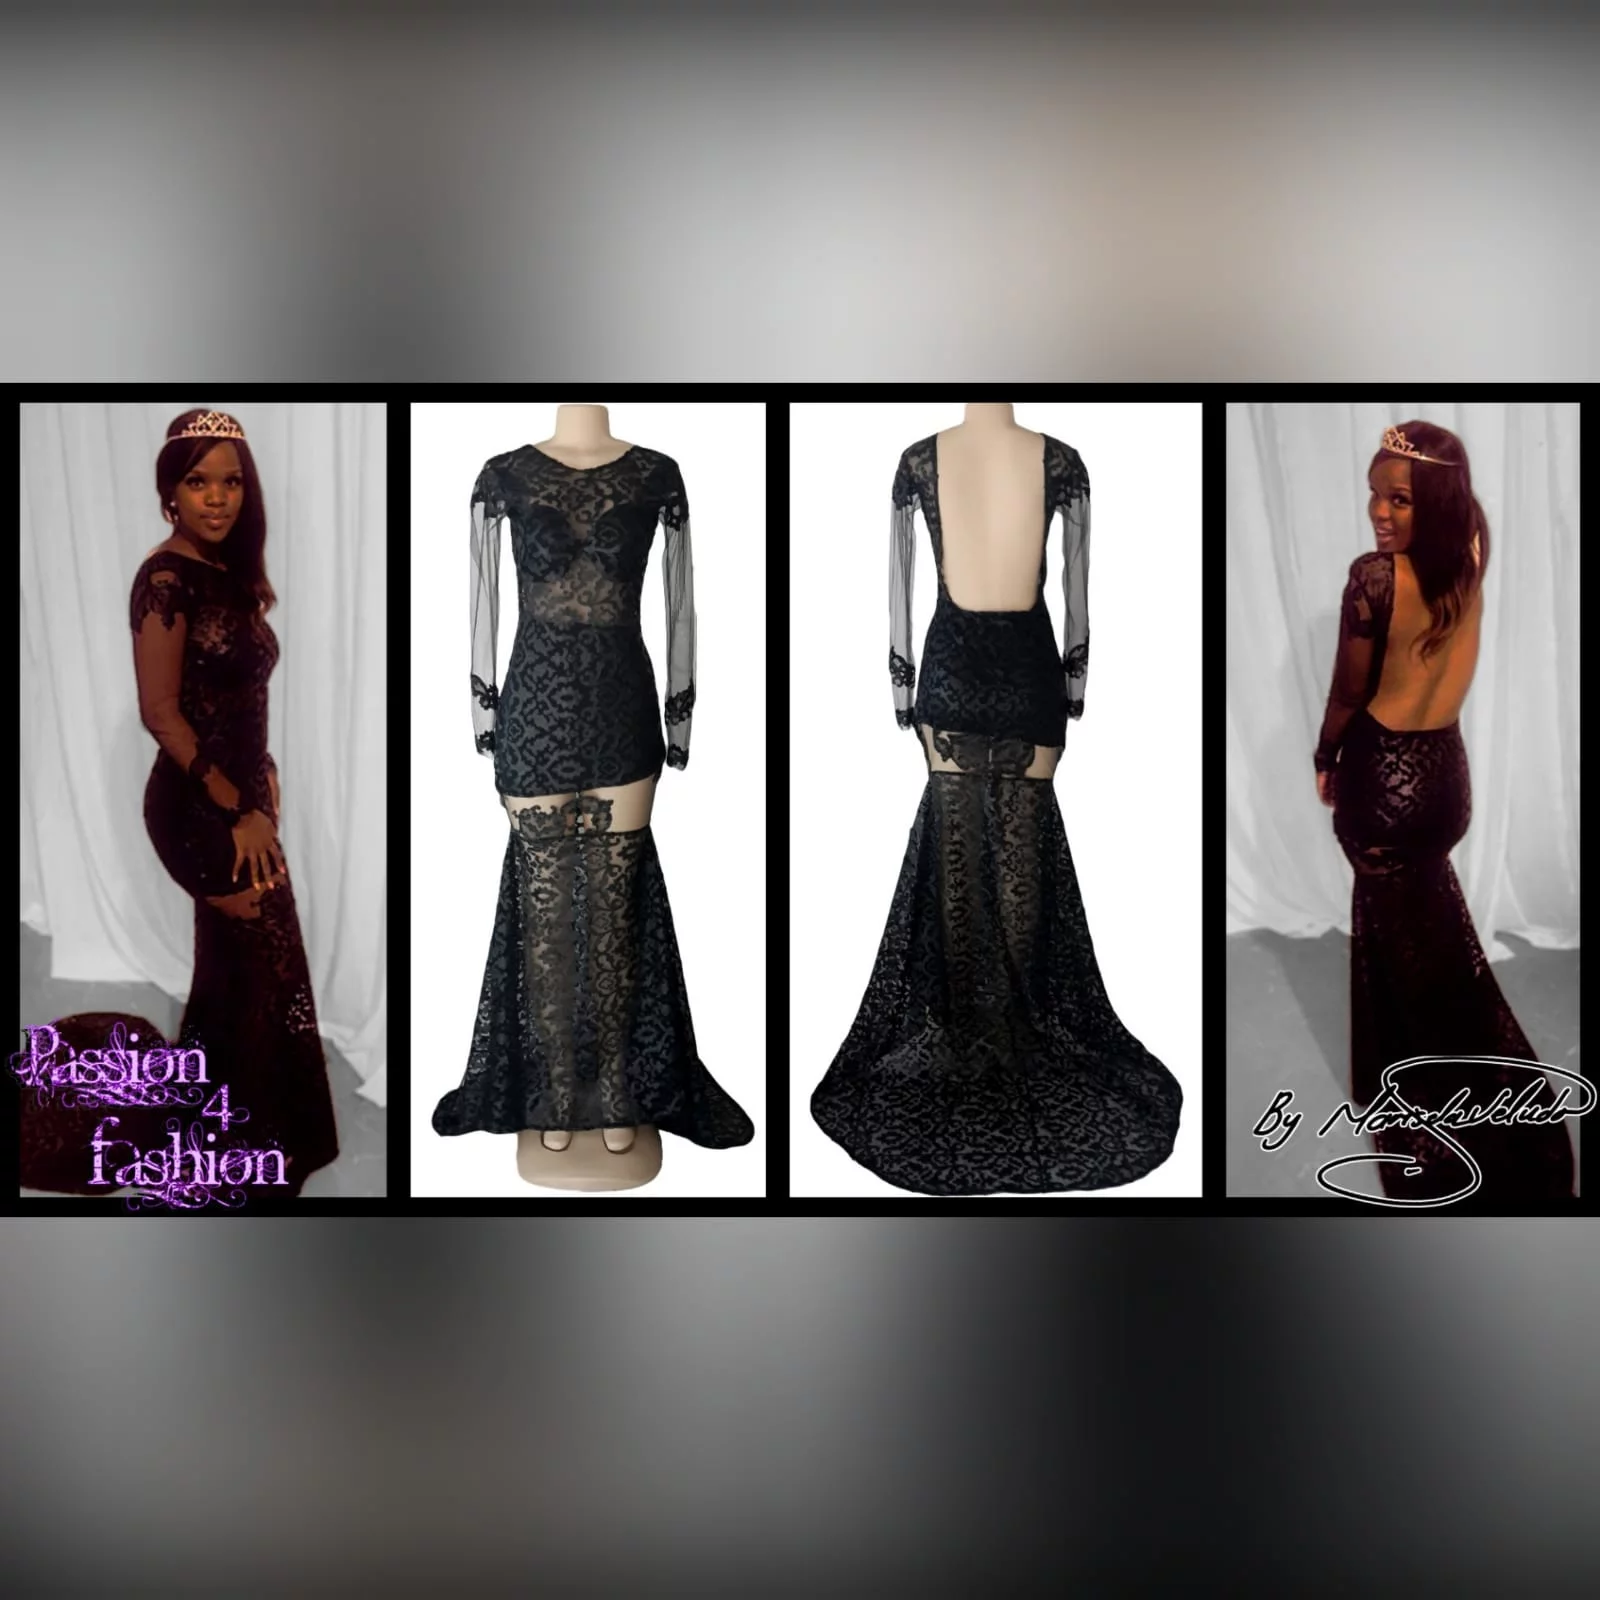 21st birthday party black dress 2 black long suede lace evening dress for 21st birthday party, with sheer black long sleeves and sheer thigh area, with a train and an open back